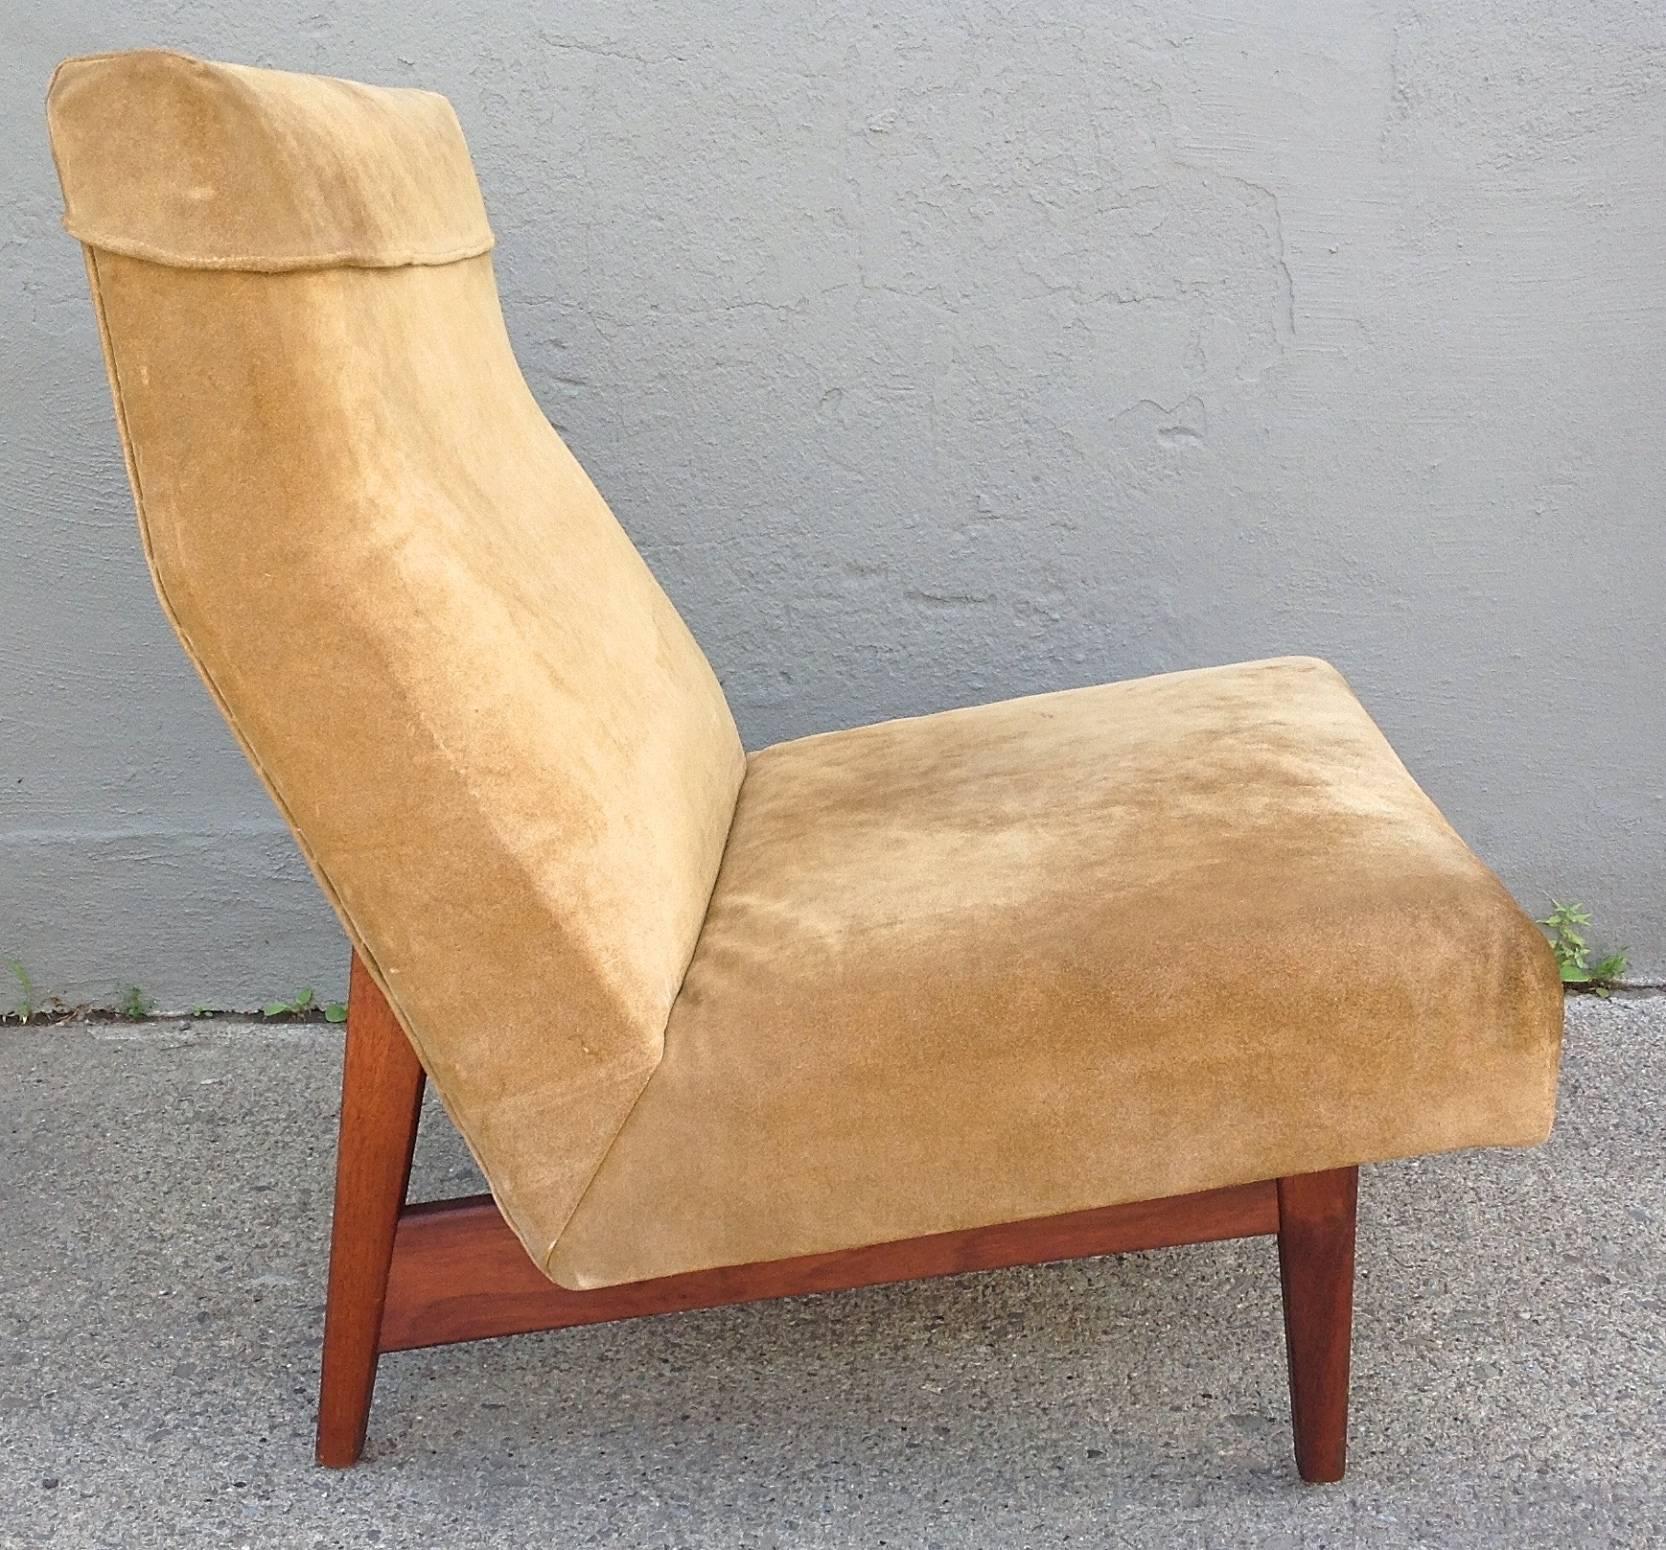 A wonderful example of a Jens Risom slipper chair in beautifully worn suede in warm tones of honey and aged moss supported by exposed walnut frame. Chair dates from the 1950s.